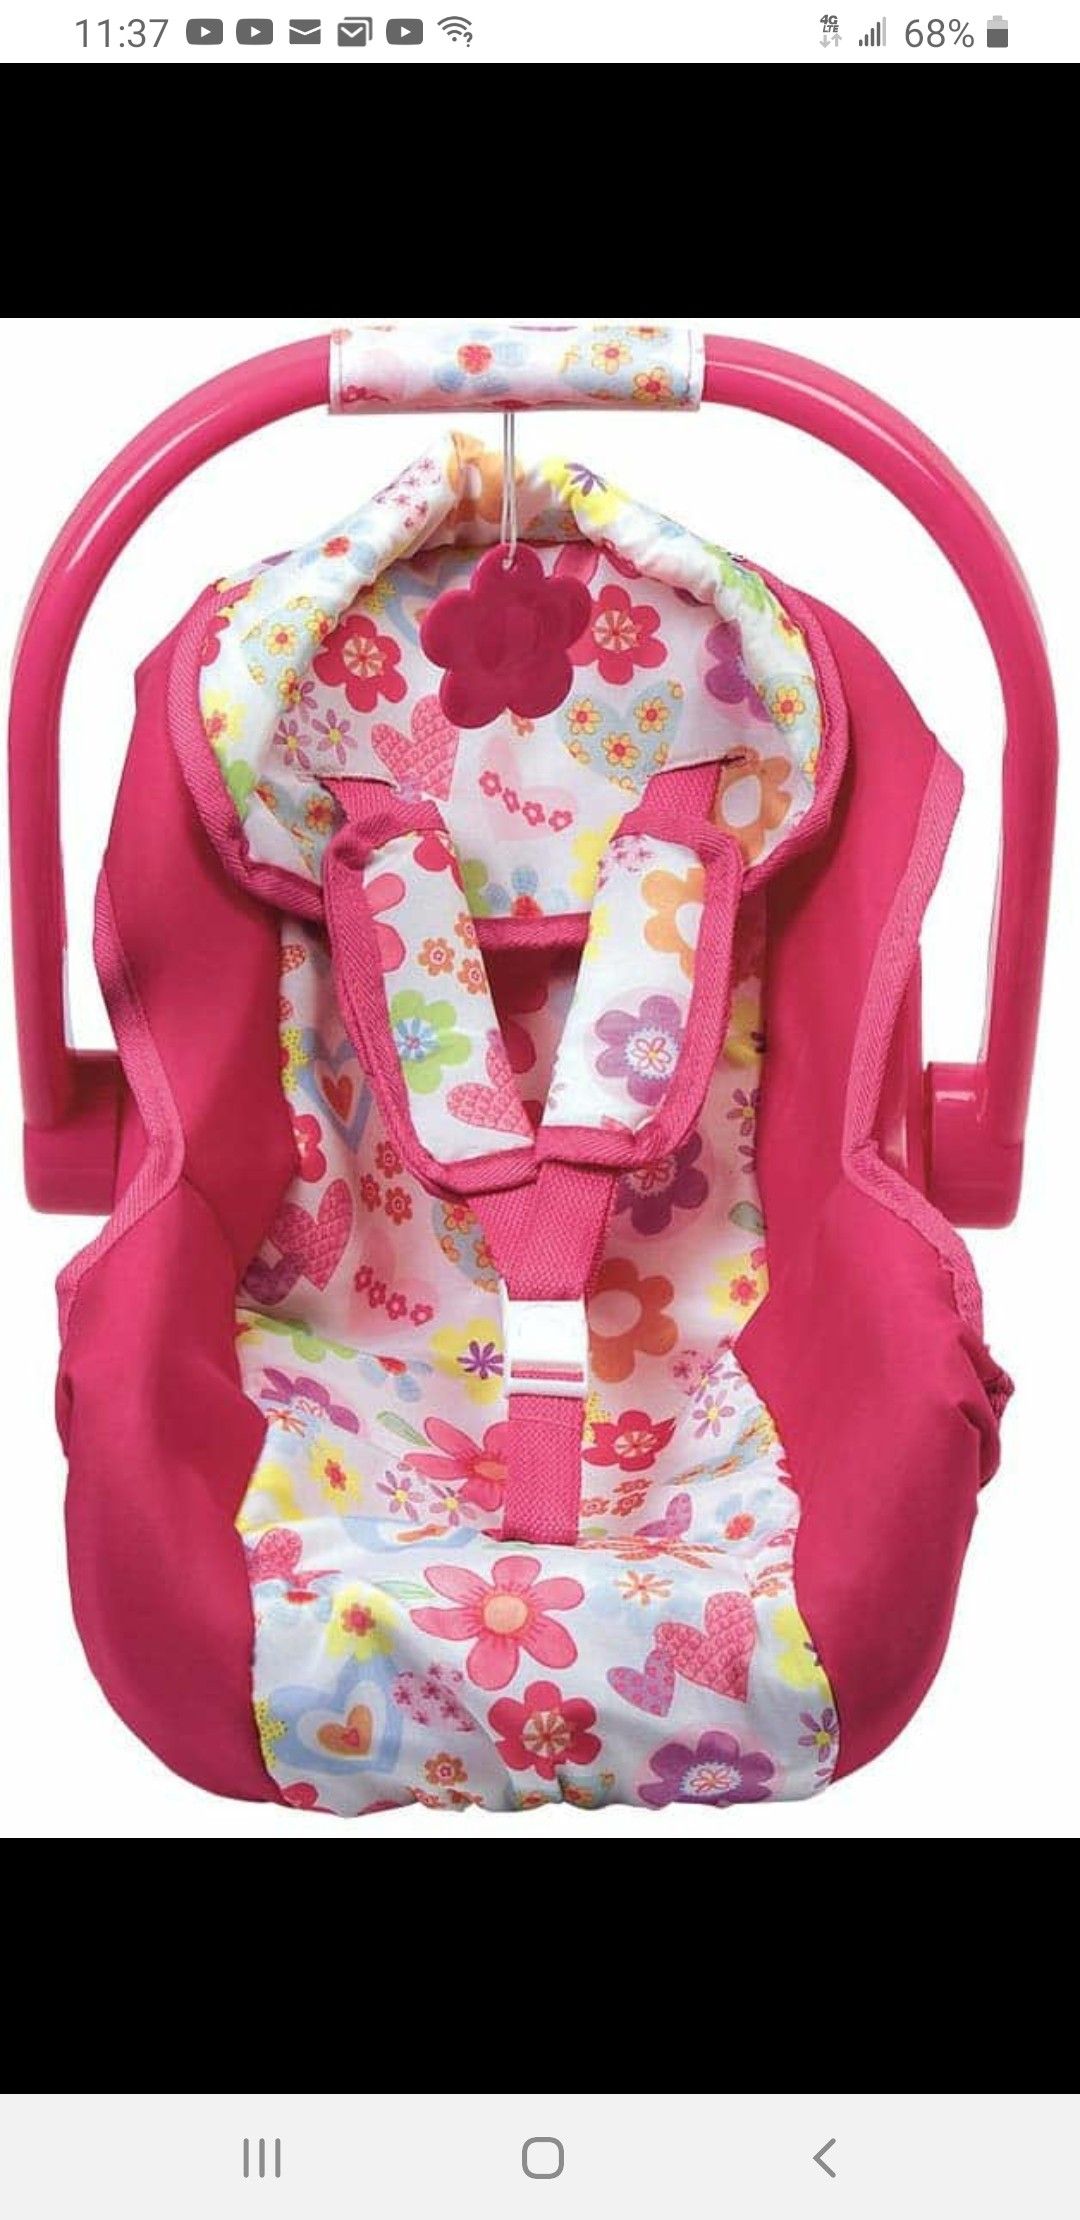 Car seat/ carrier for baby doll